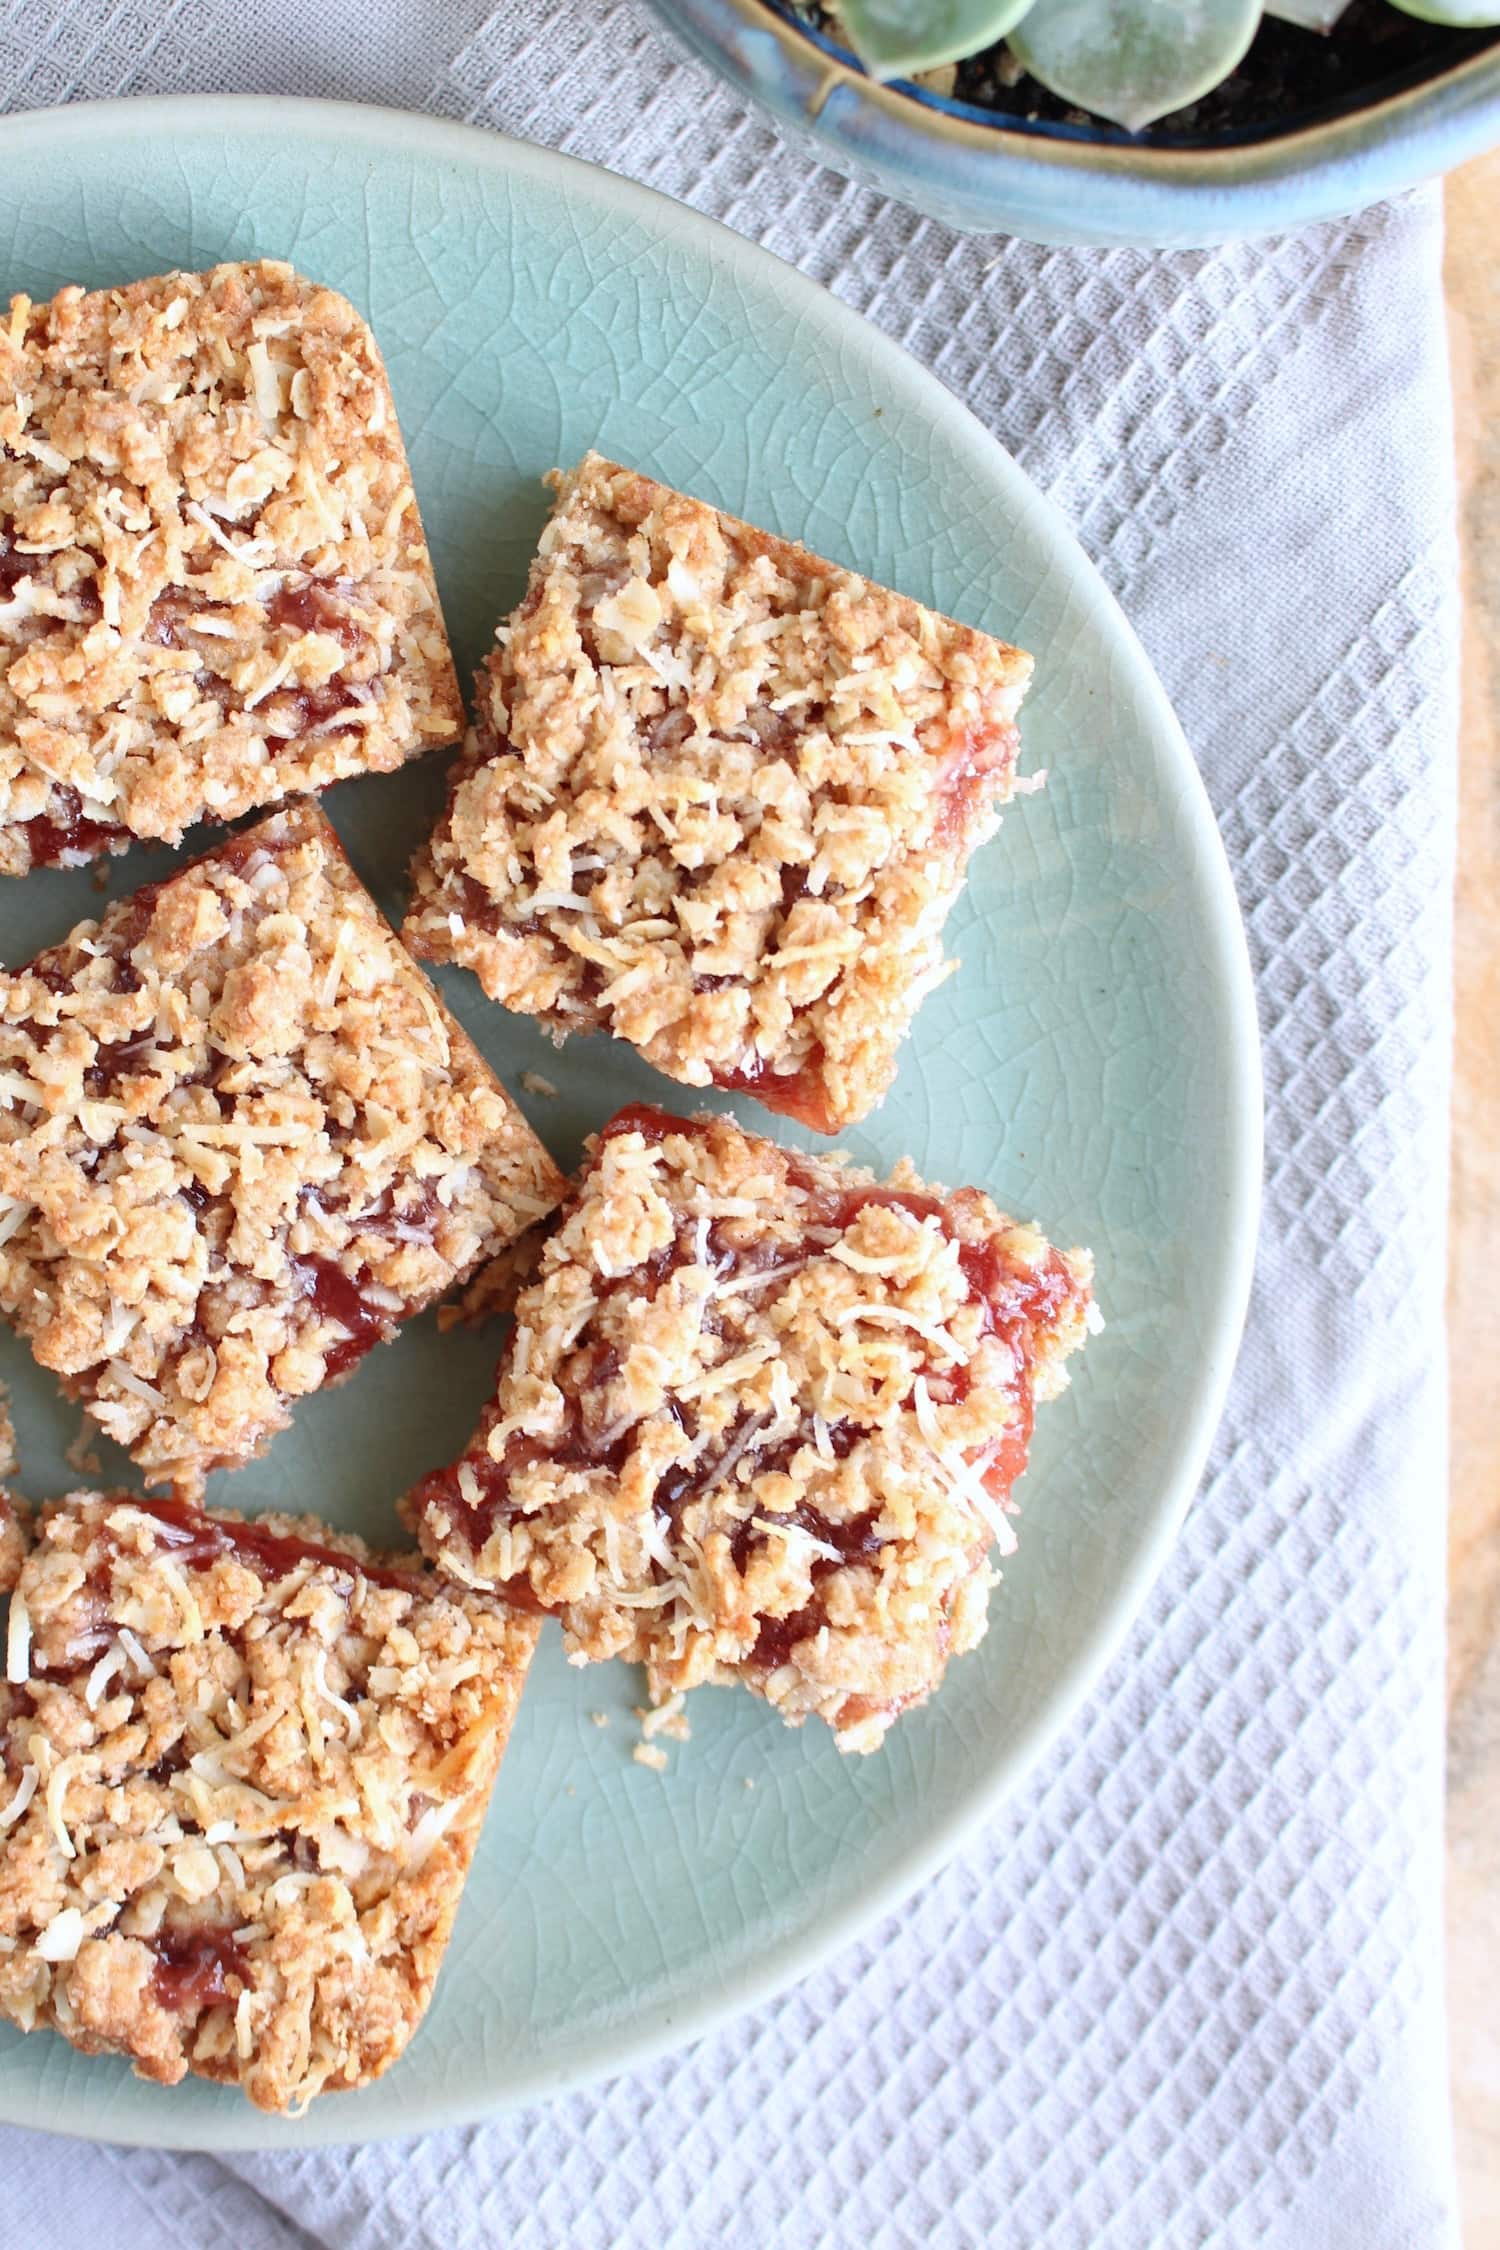 Oatmeal bar filled with strawberry jam on a blue plate. 